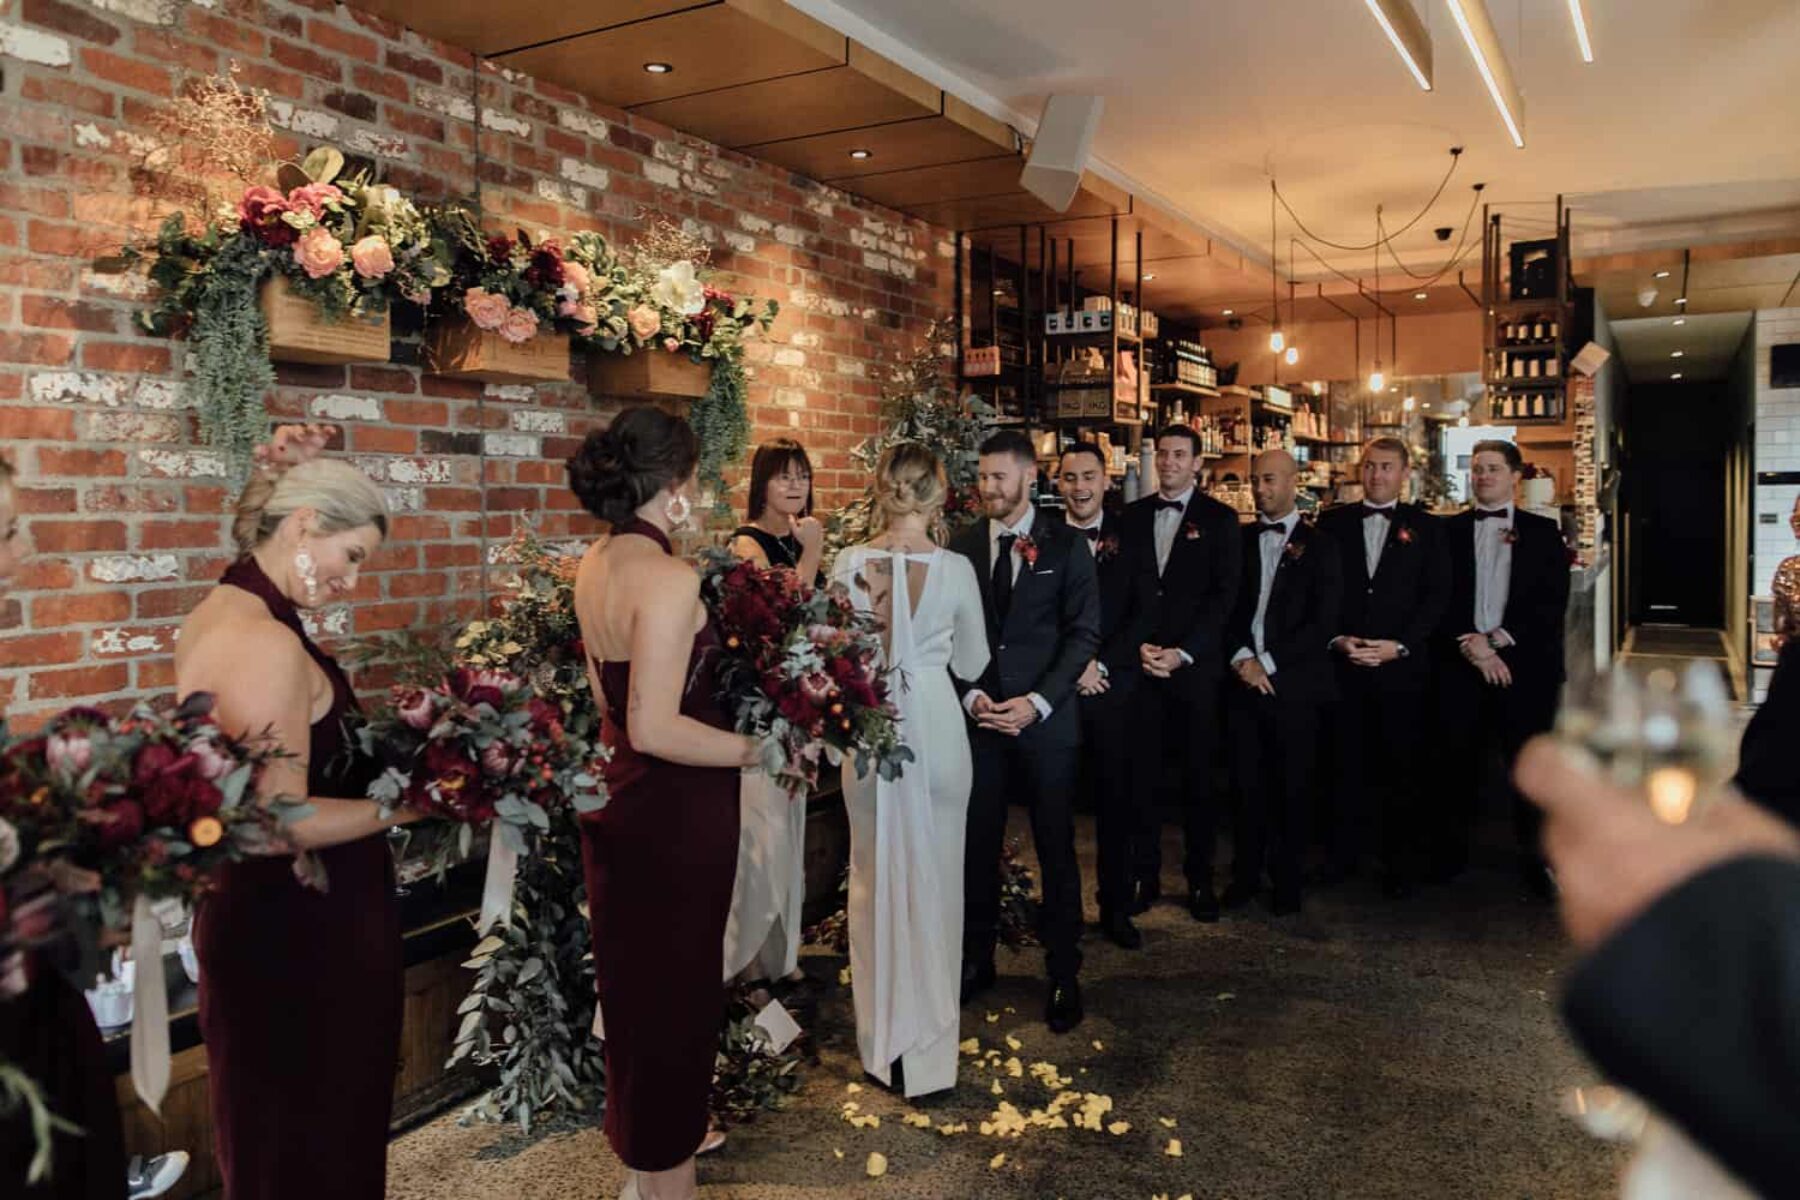 Modern, intimate Melbourne wedding at a Prahran cocktail bar - Photography by Jimmy Raper